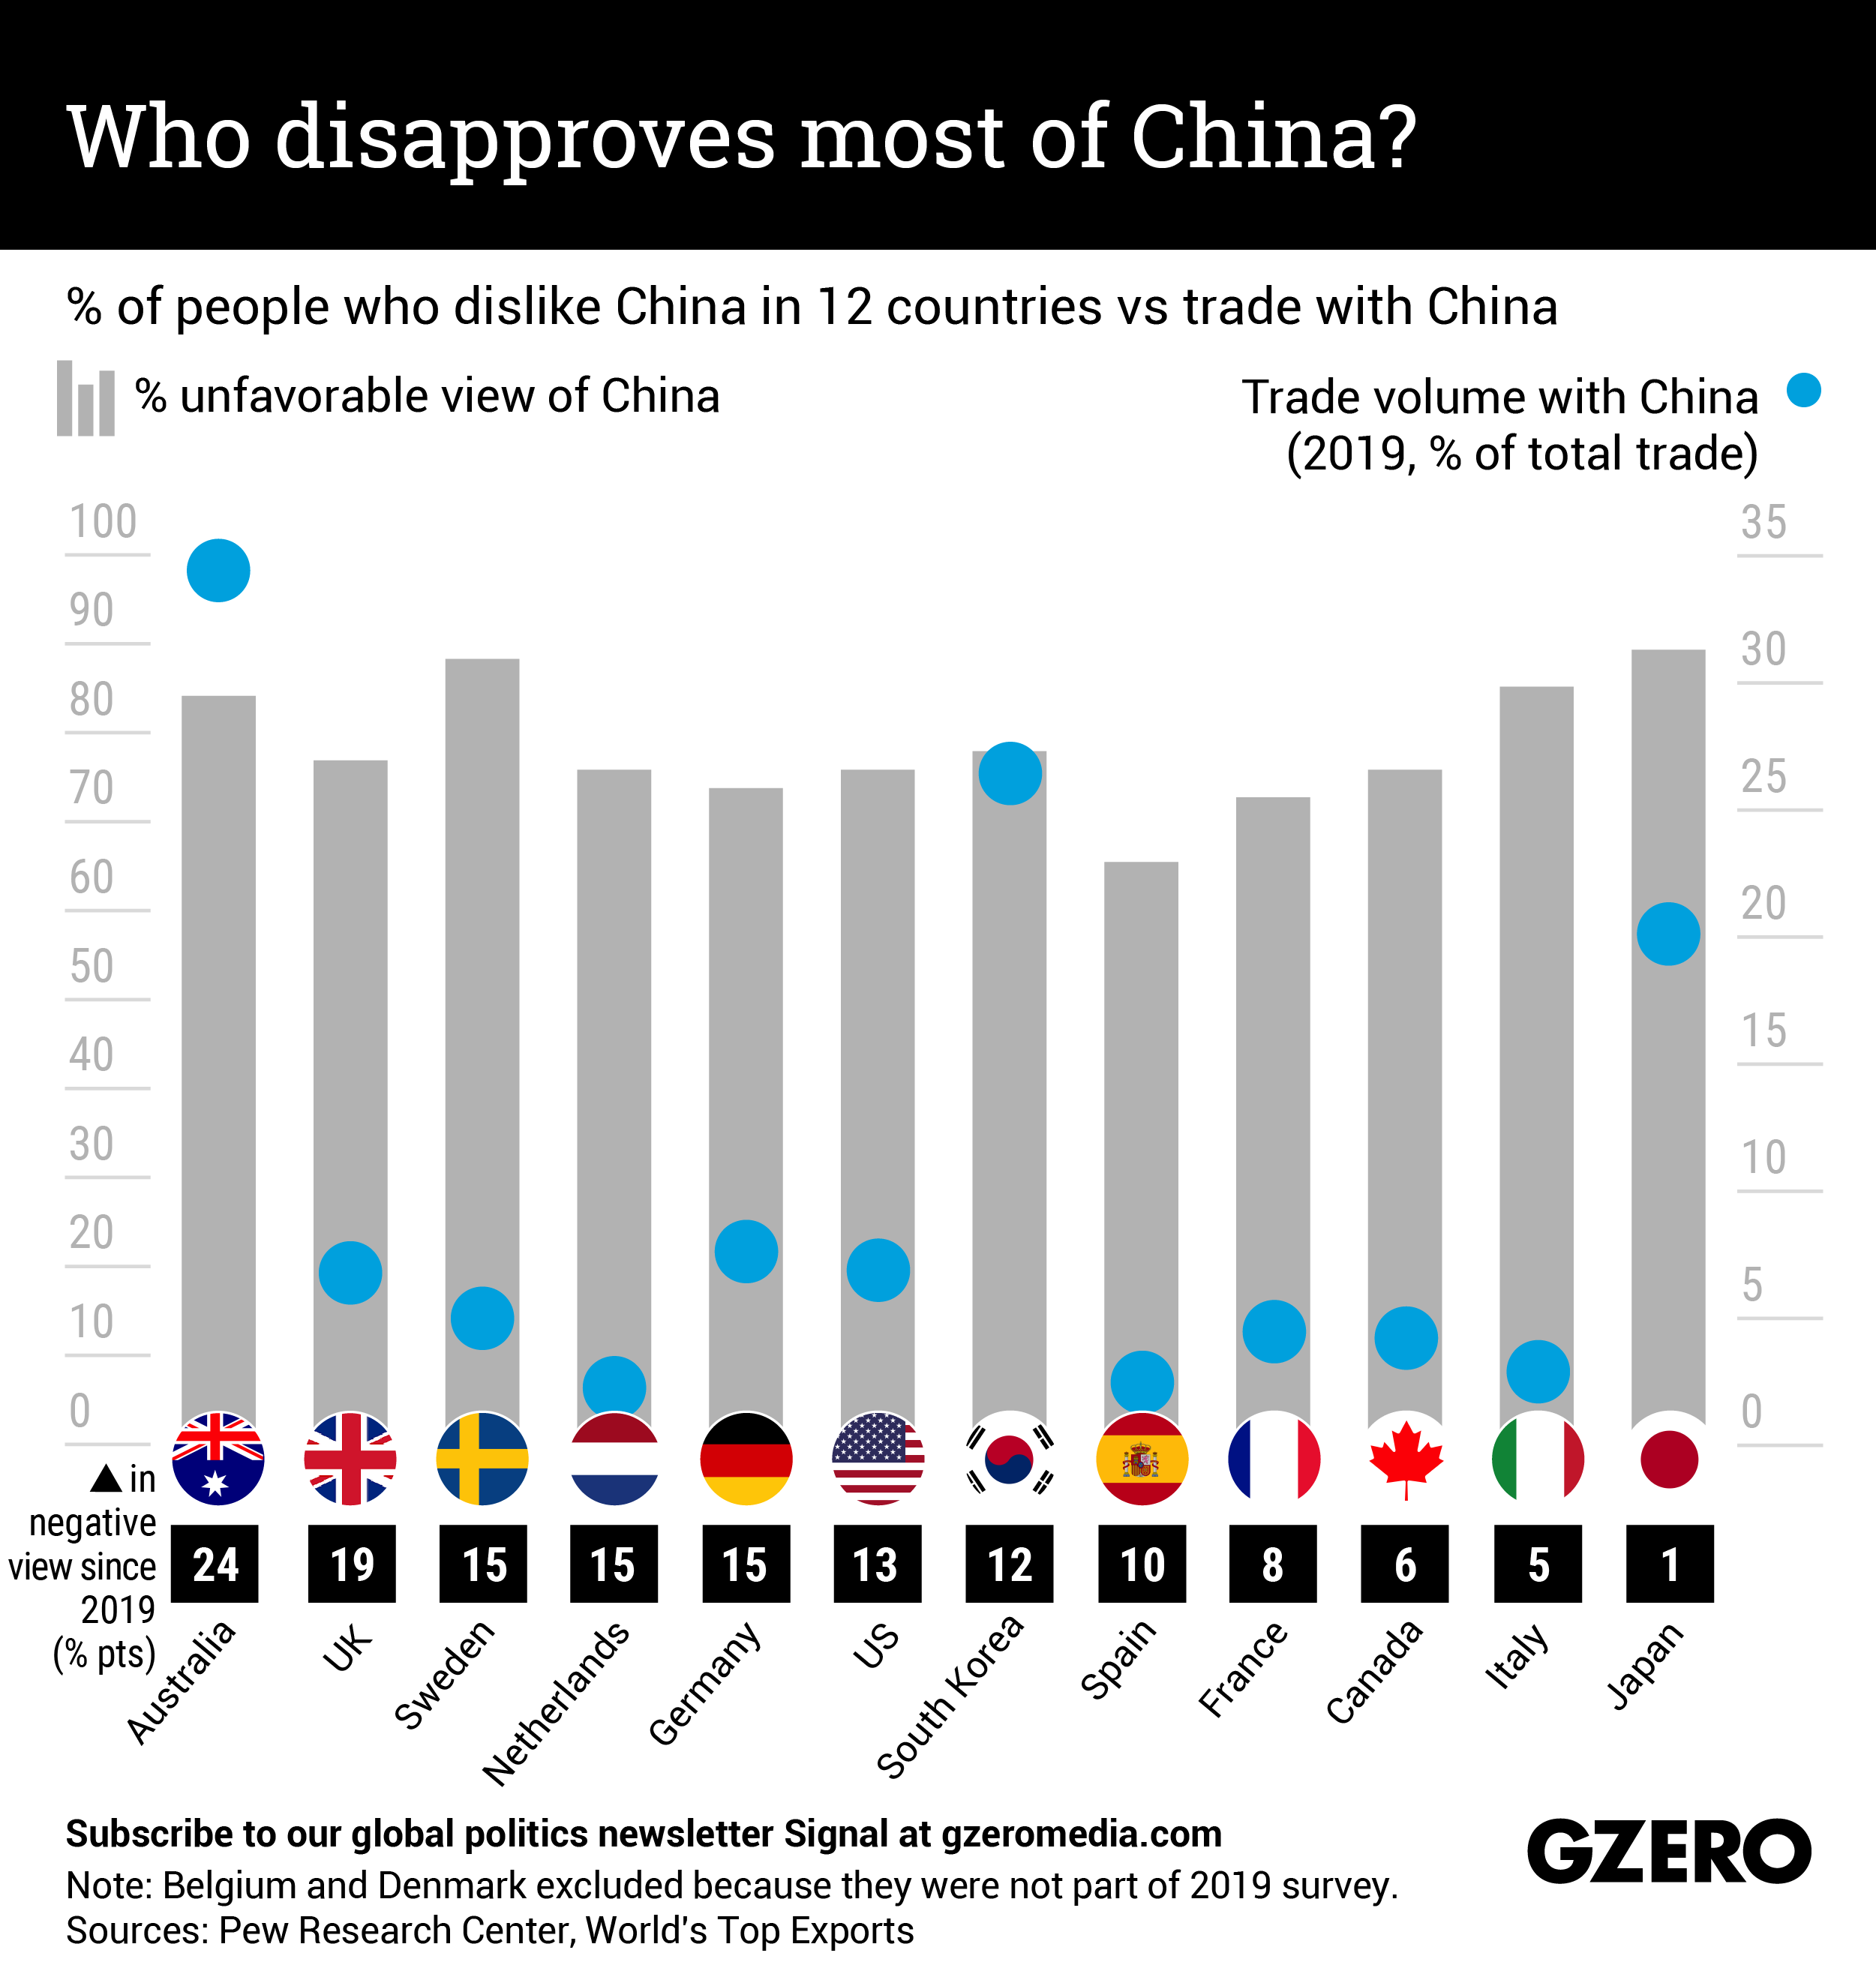 The Graphic Truth: Who disapproves most of China?